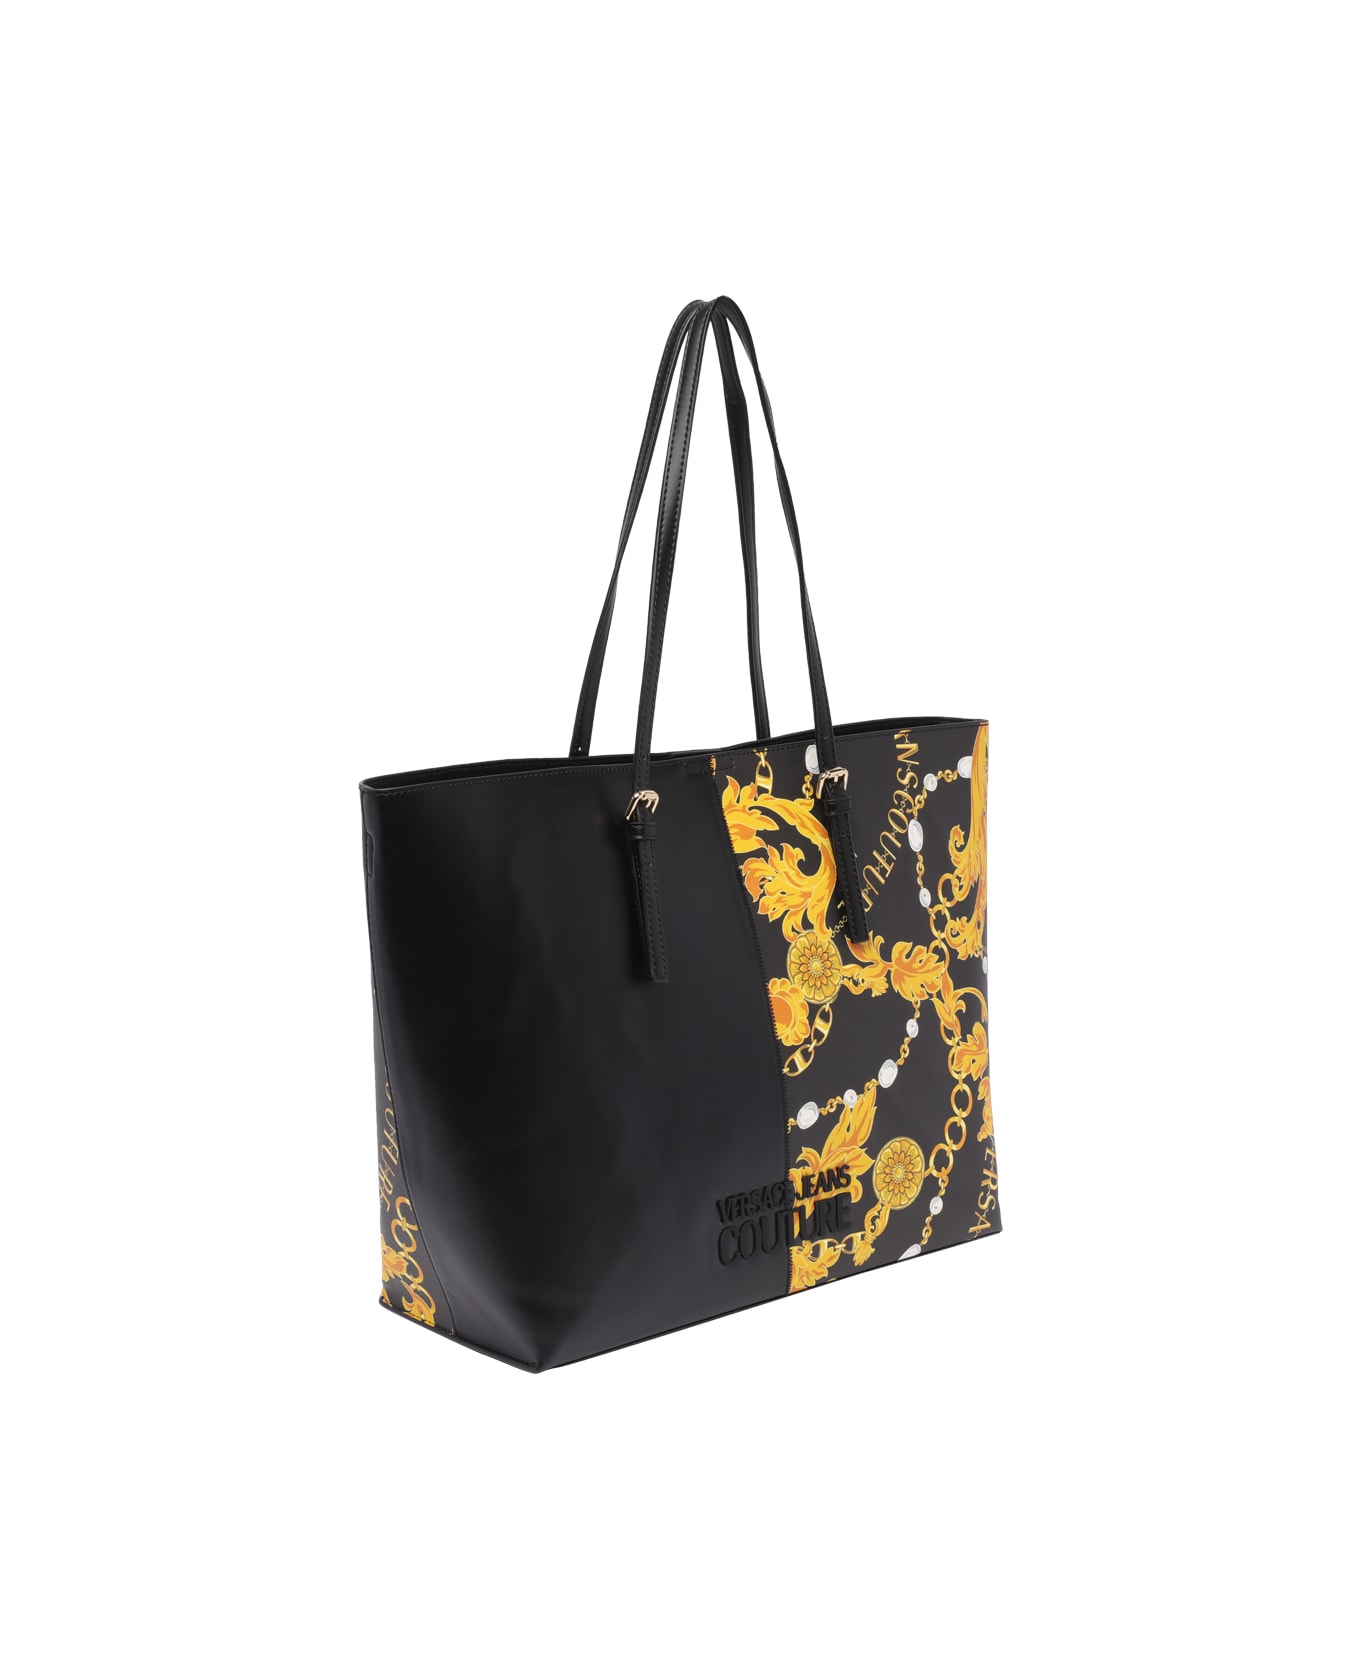 Versace Jeans Couture Chain Couture Tote Bag - Black